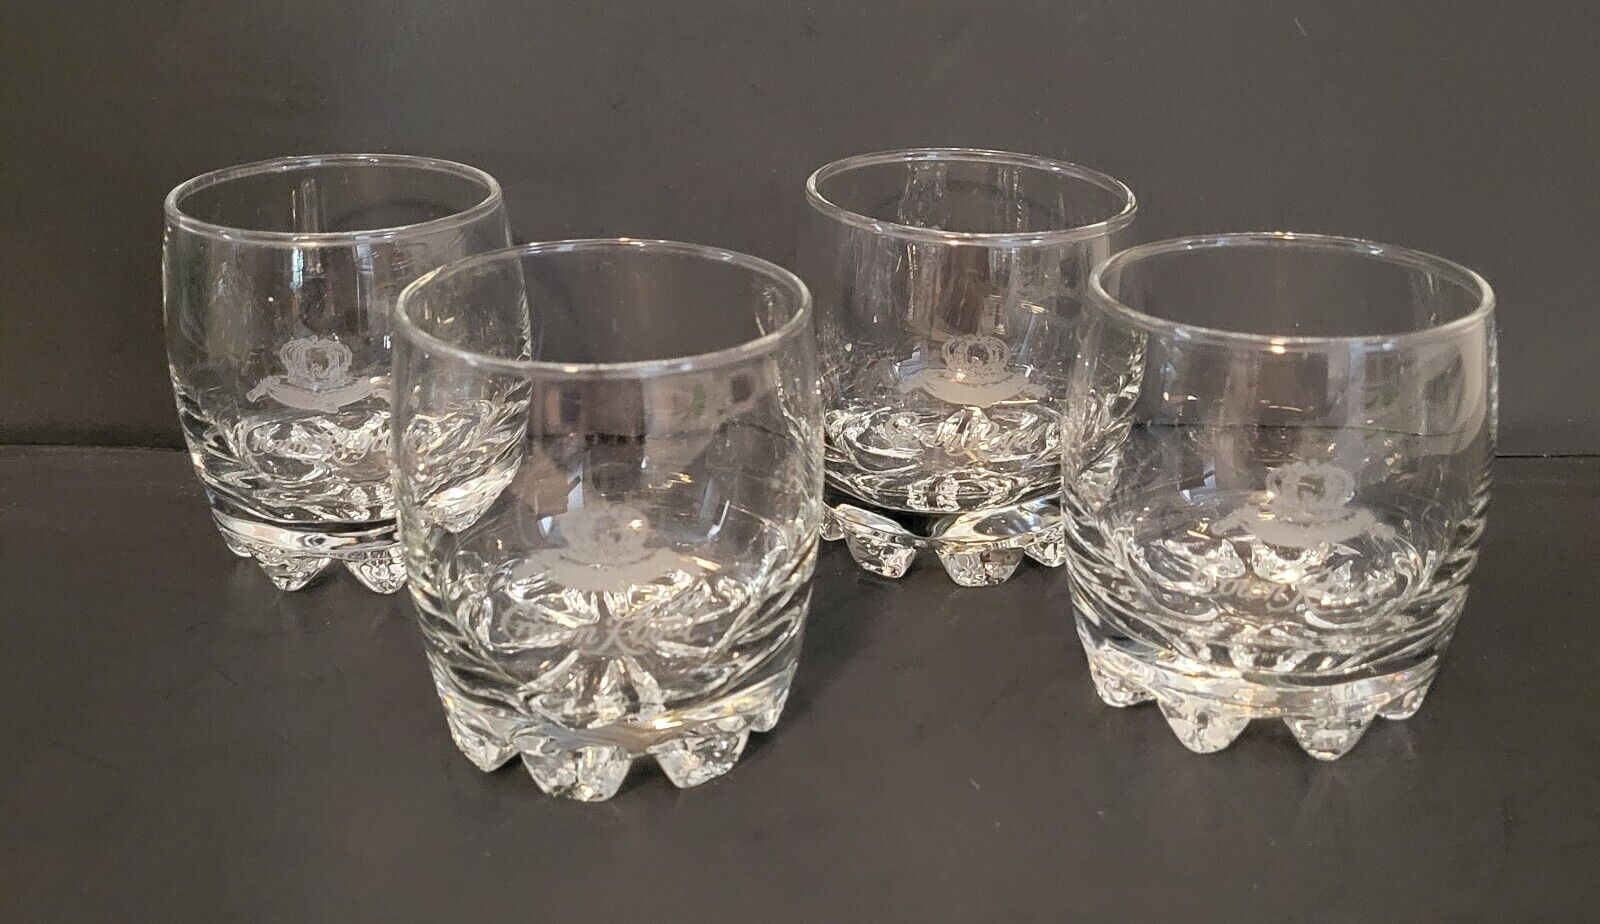 SET OF 4 CROWN ROYAL LOWBALL GLASSES MADE IN ITALY